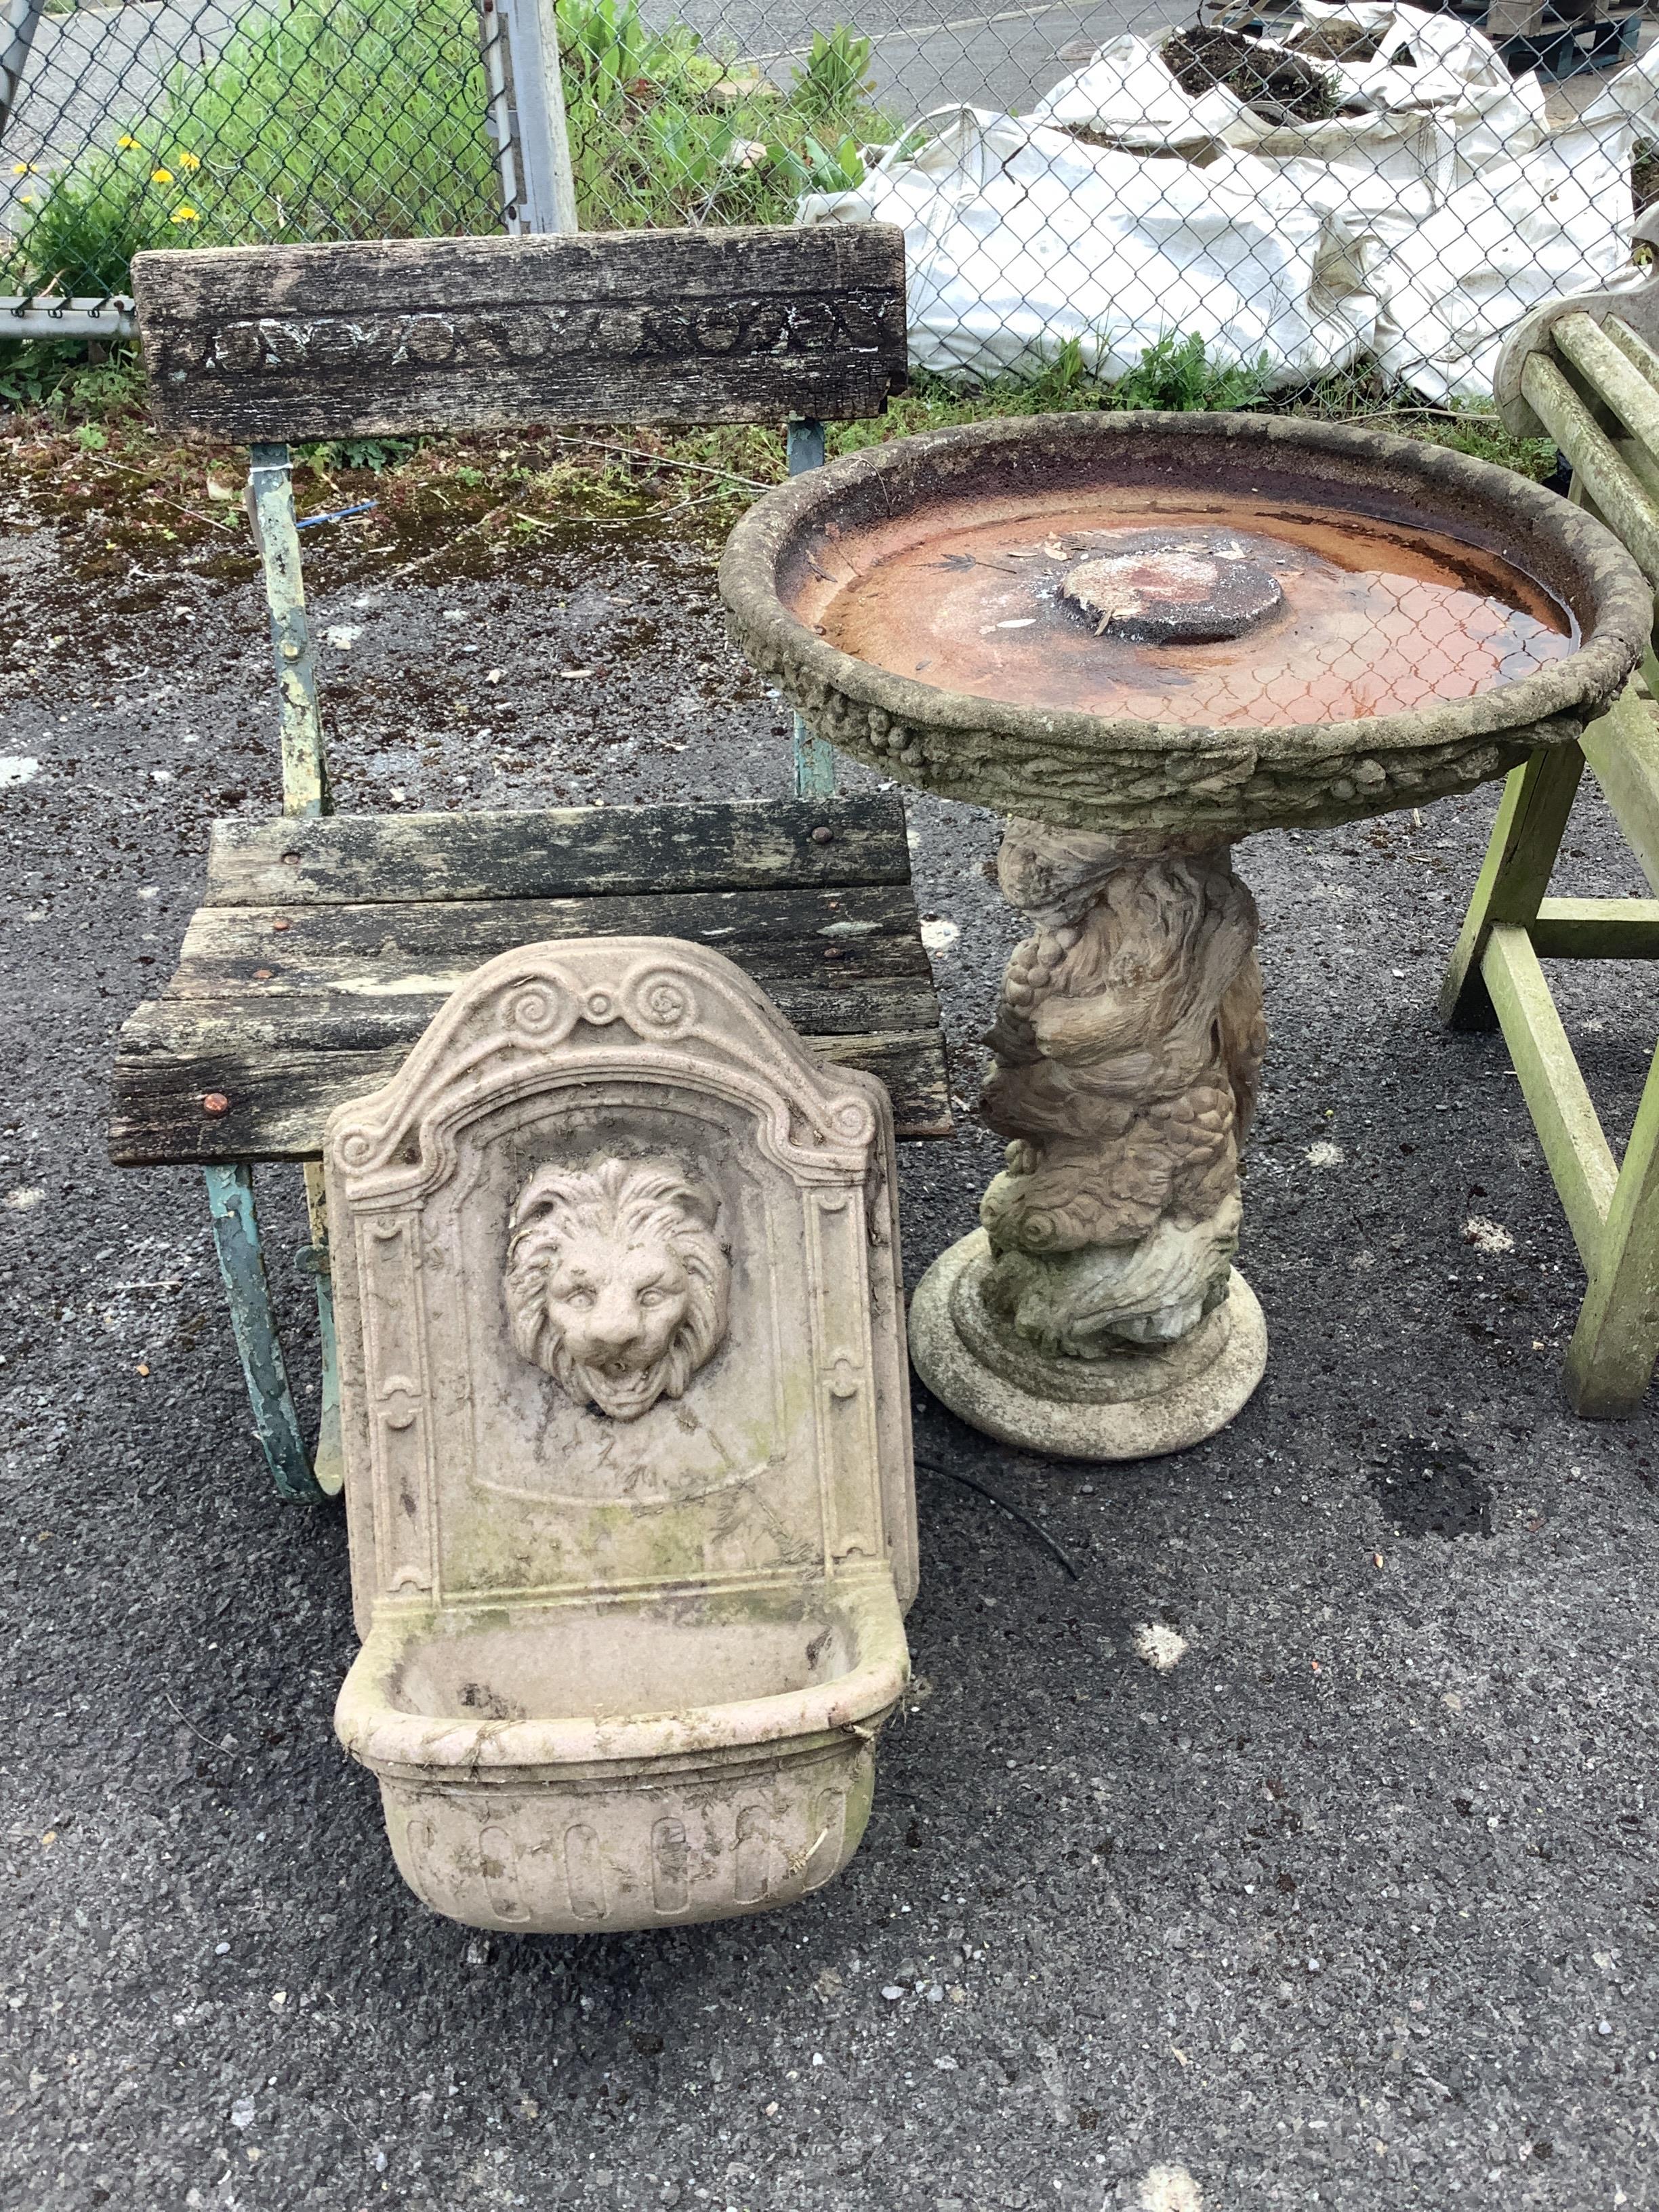 A composition faux marble lion mask wall fountain, a slatted wrought iron garden chair and a circular reconstituted stone bird bath